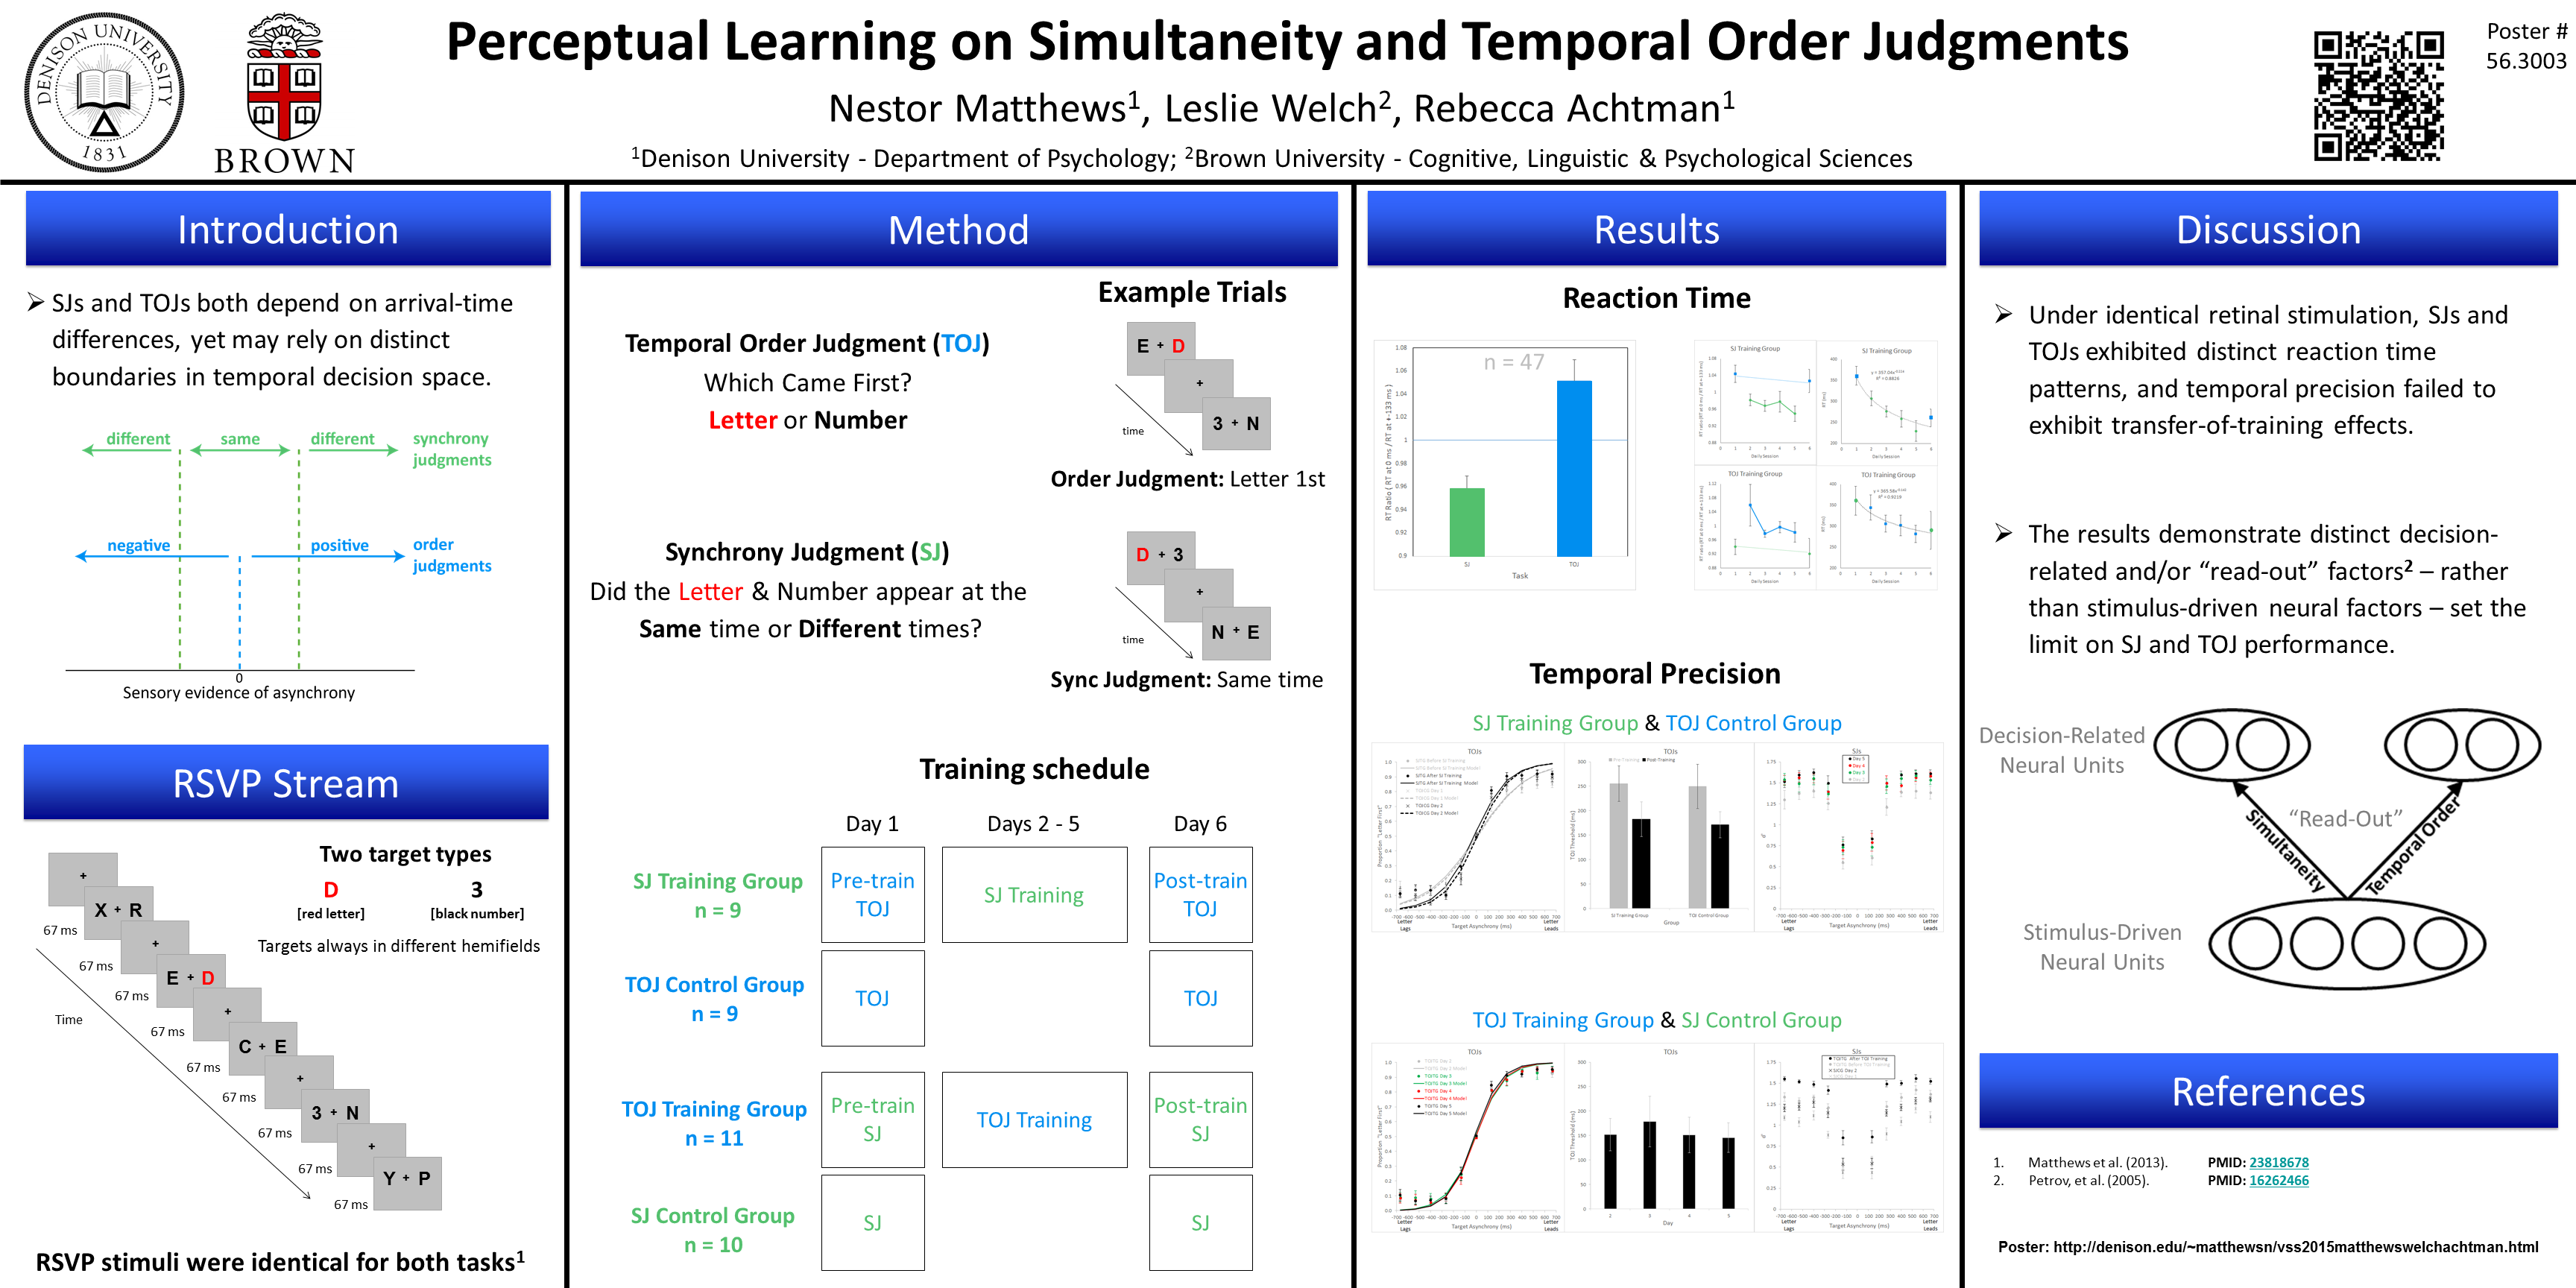 Perceptual Learning on Simultaneity and Temporal Order Judgments, VSS 2015